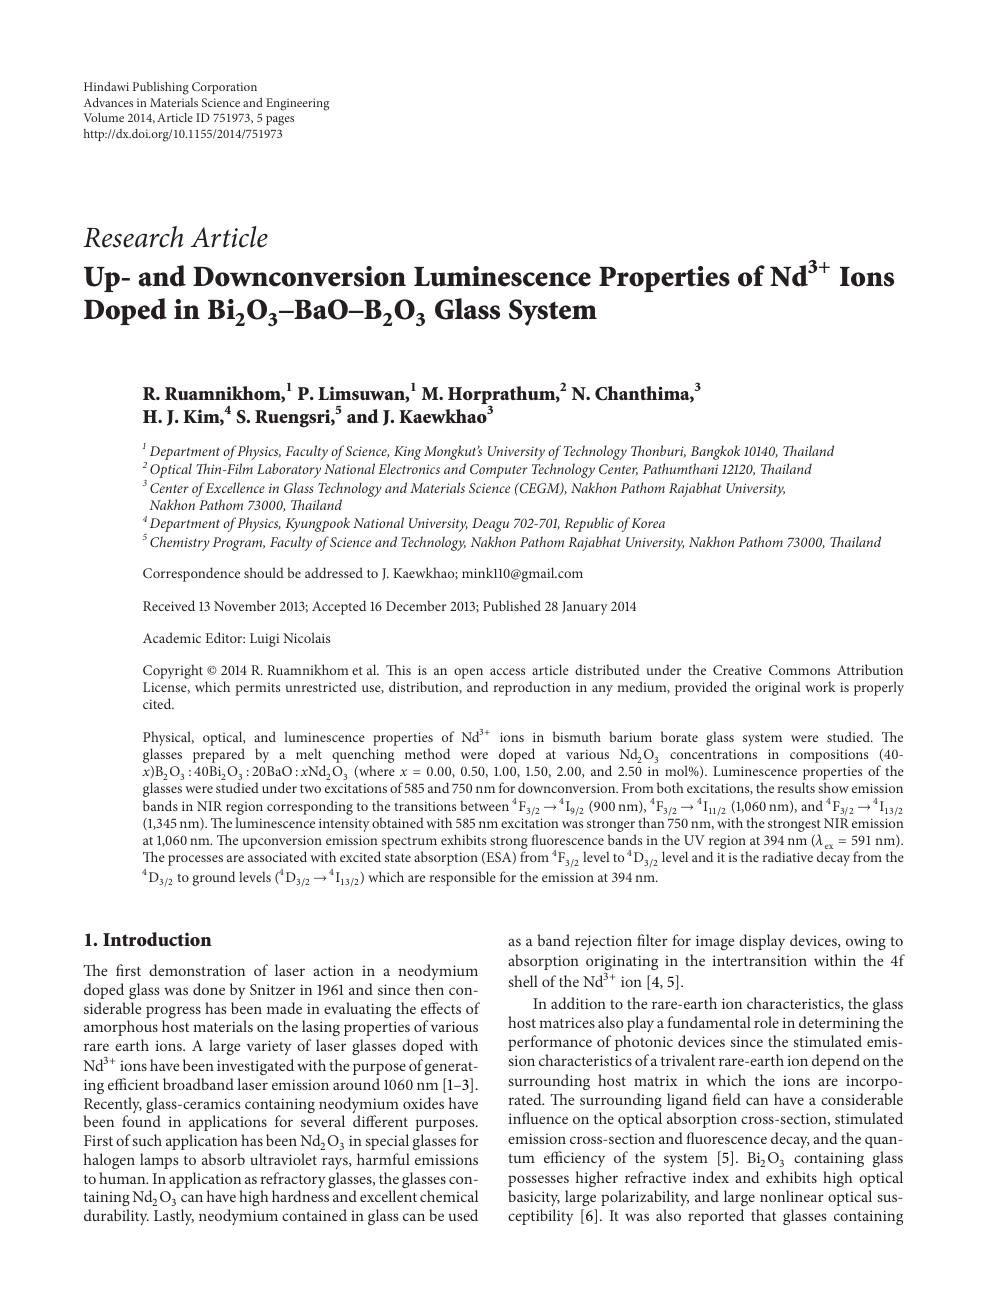 Up And Downconversion Luminescence Properties Of Nd 3 Ions Doped In Bi 2 O 3 Bao B 2 O 3 Glass System Topic Of Research Paper In Materials Engineering Download Scholarly Article